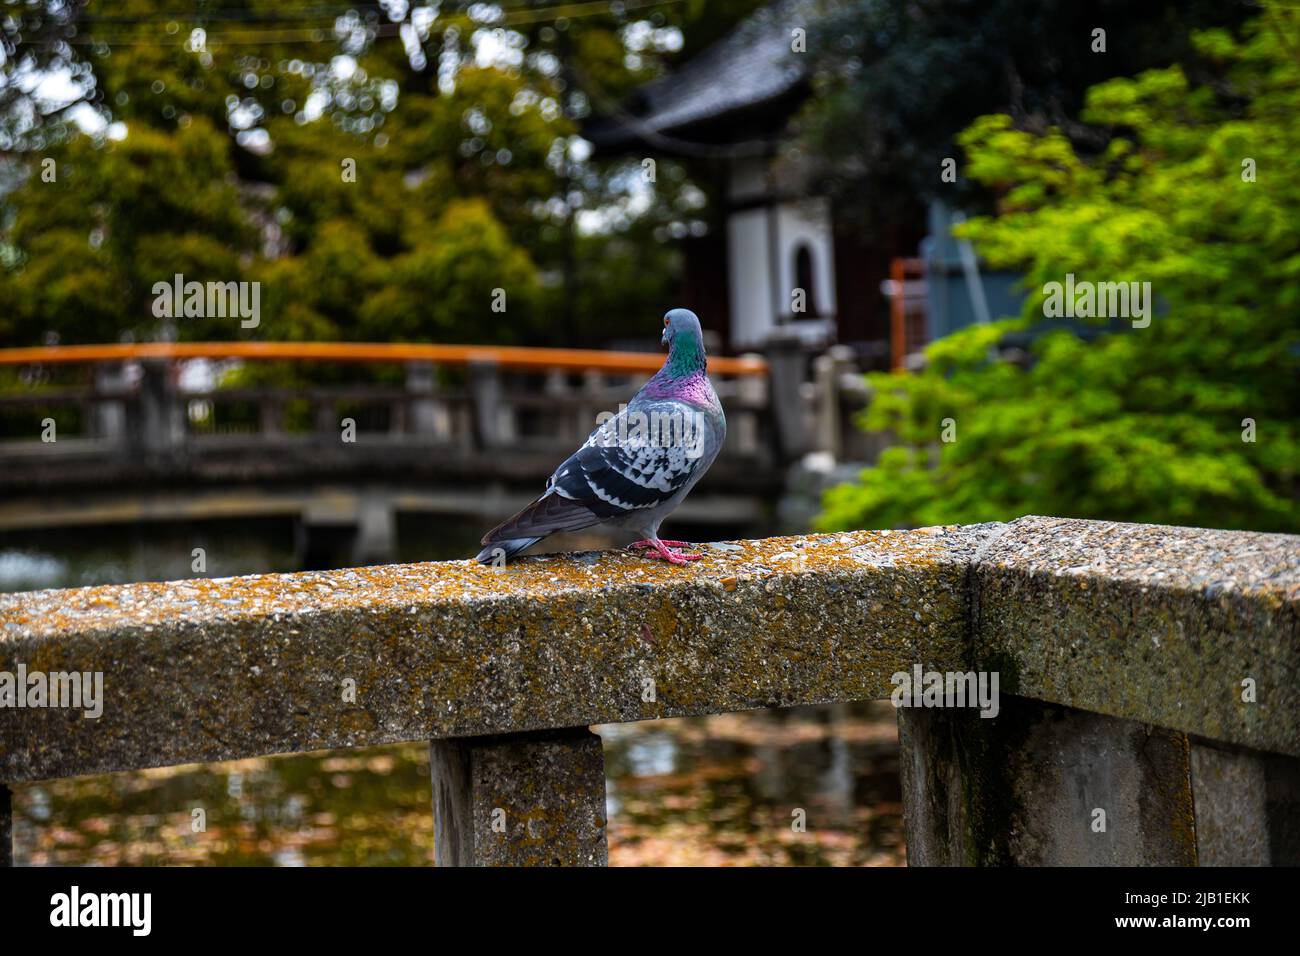 Pigeon bird standing on the mossy stone bridge rail in Japanese garden in sunny day. The bird is watching another bridge in distance. Stock Photo